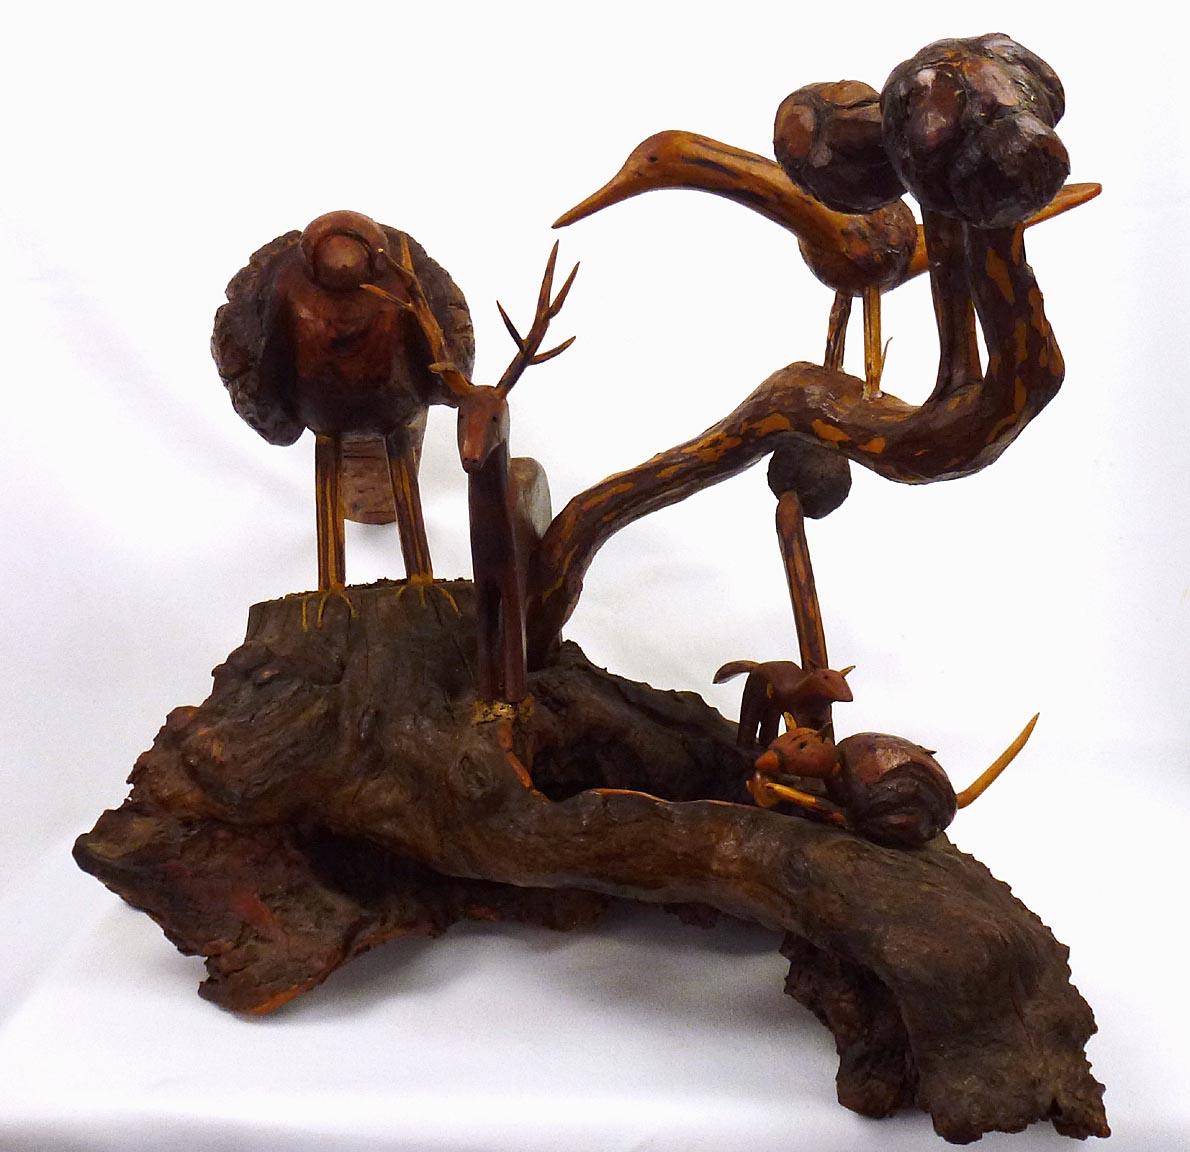 American Assemblage of Carved Birds and Animals by the Outsider Artist Russell Gillespie